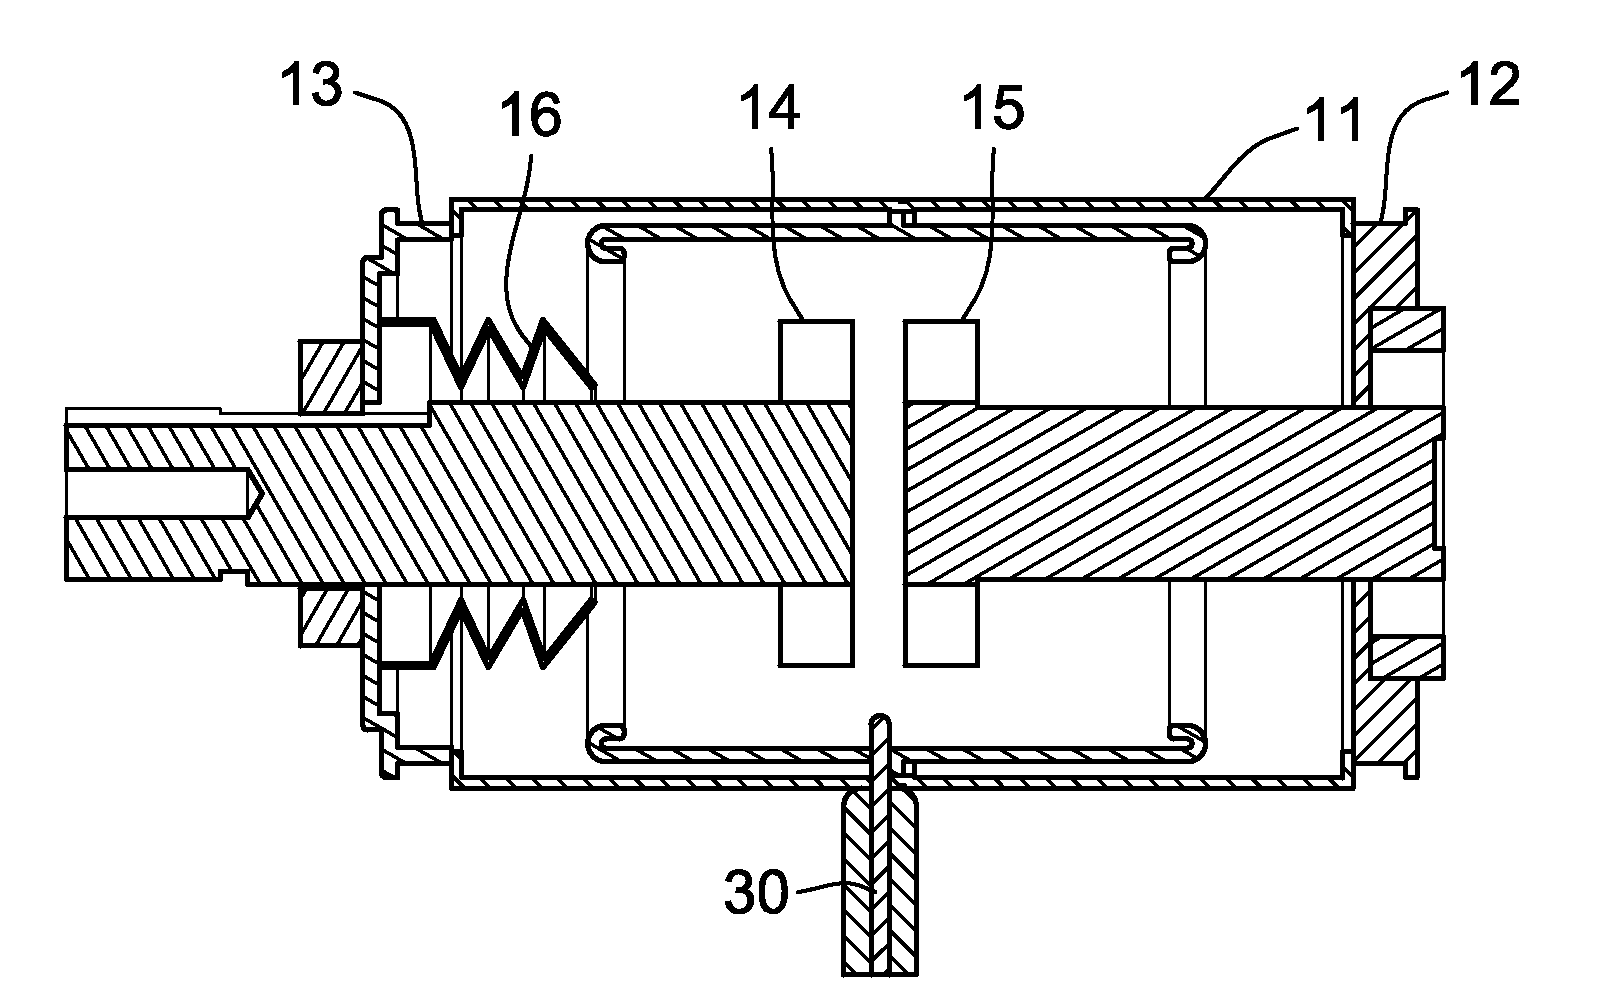 Arcing fault and arc flash protection system having a high-speed switch